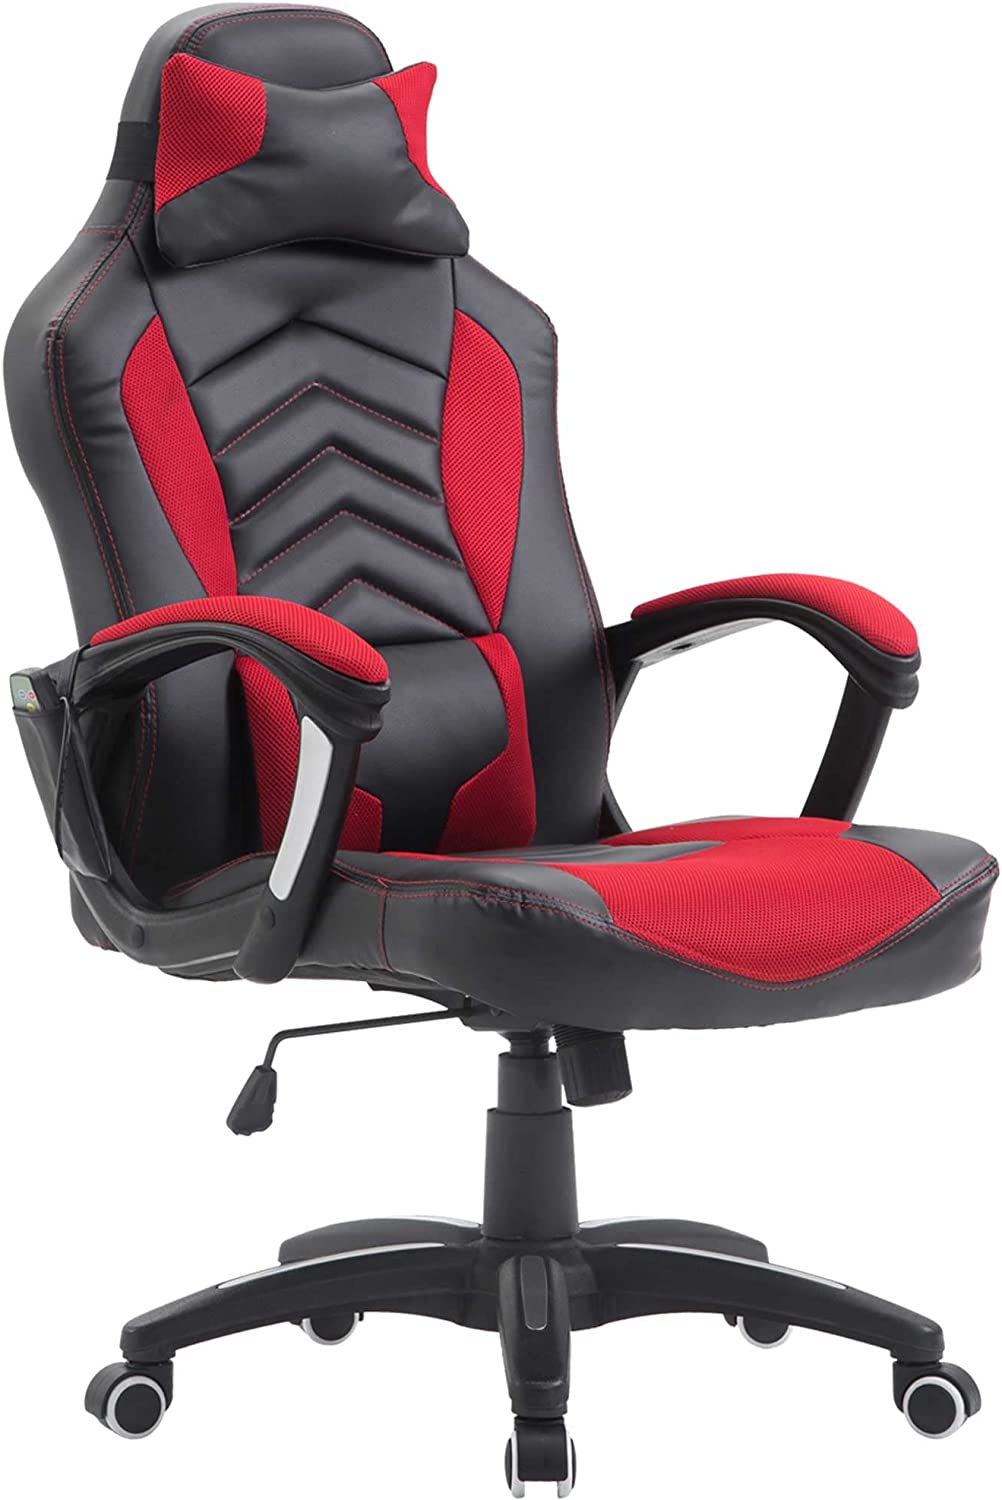 SmartTechShopping Gaming chair Red Best Gaming Chair with Heat and Massage - HOMCOM 6 Vibrating Point Massage Computer Gaming Chair with 5 Modes